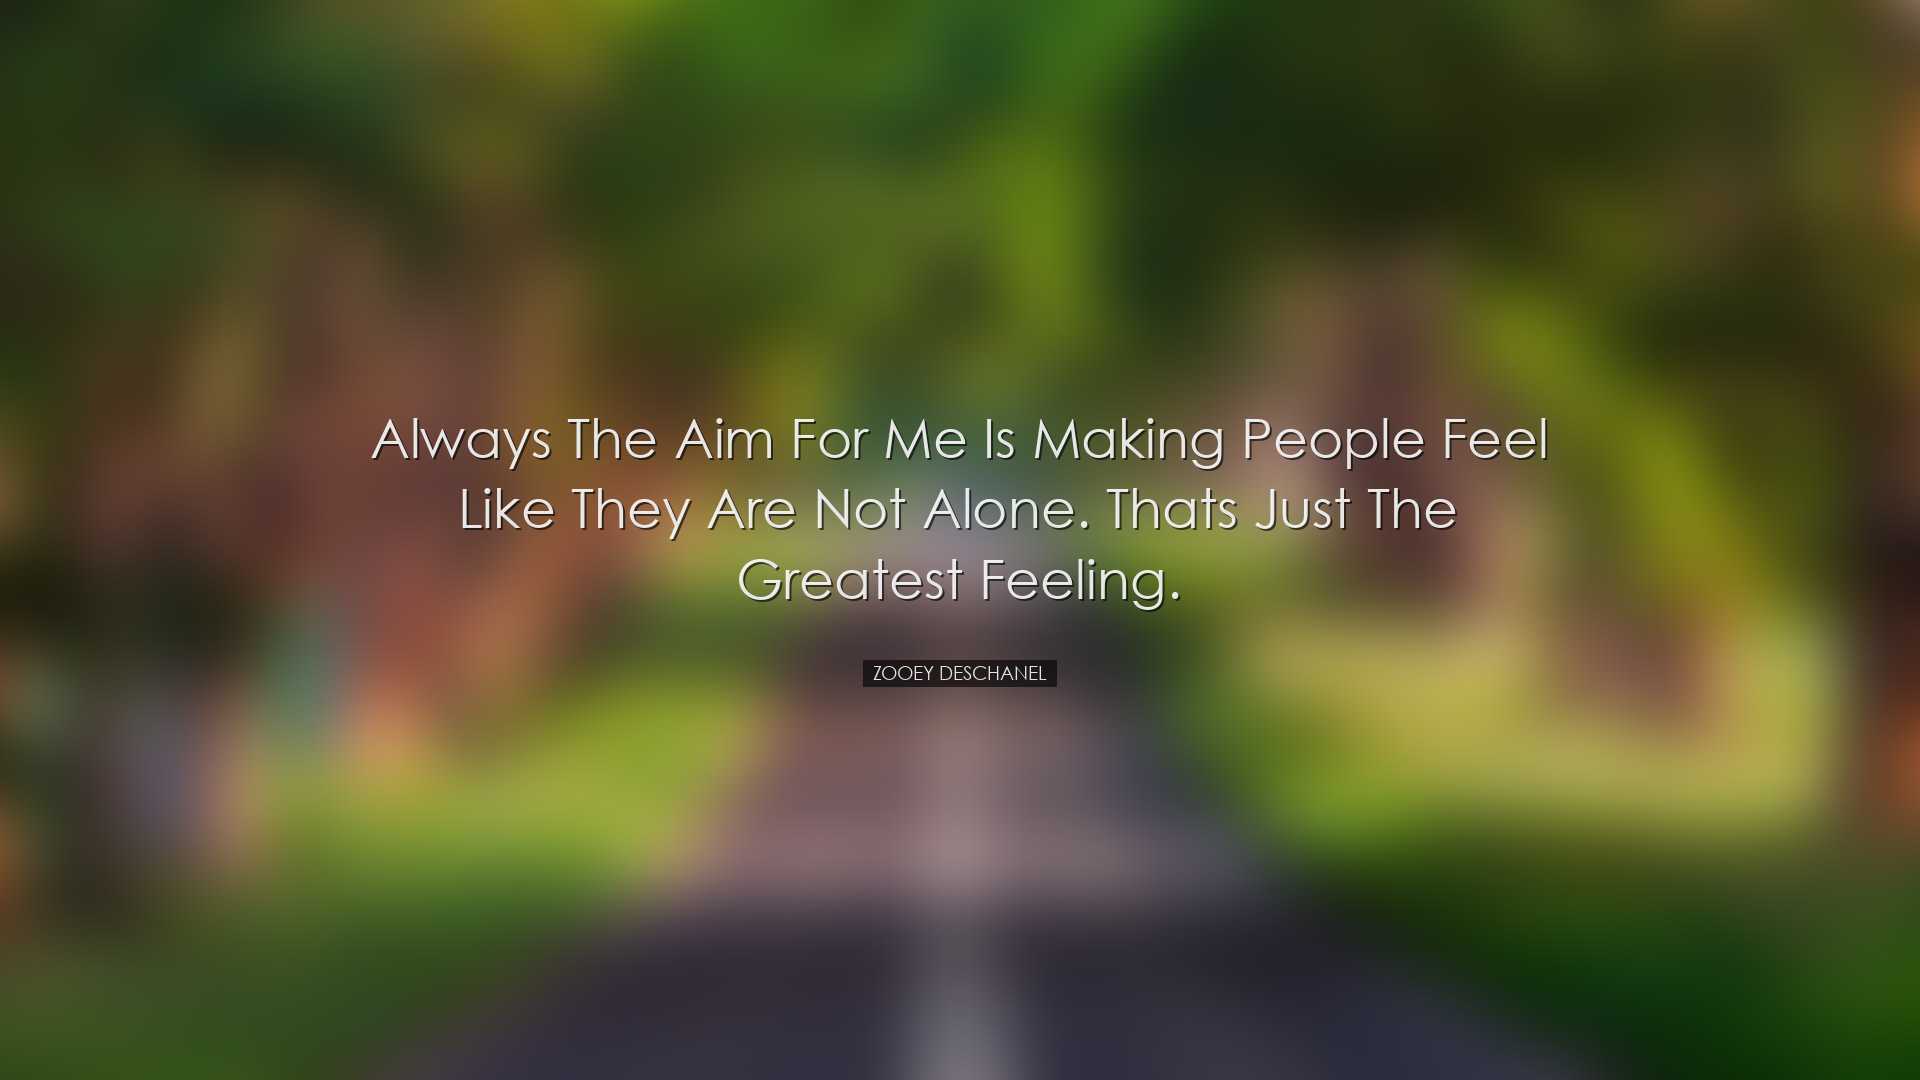 Always the aim for me is making people feel like they are not alon